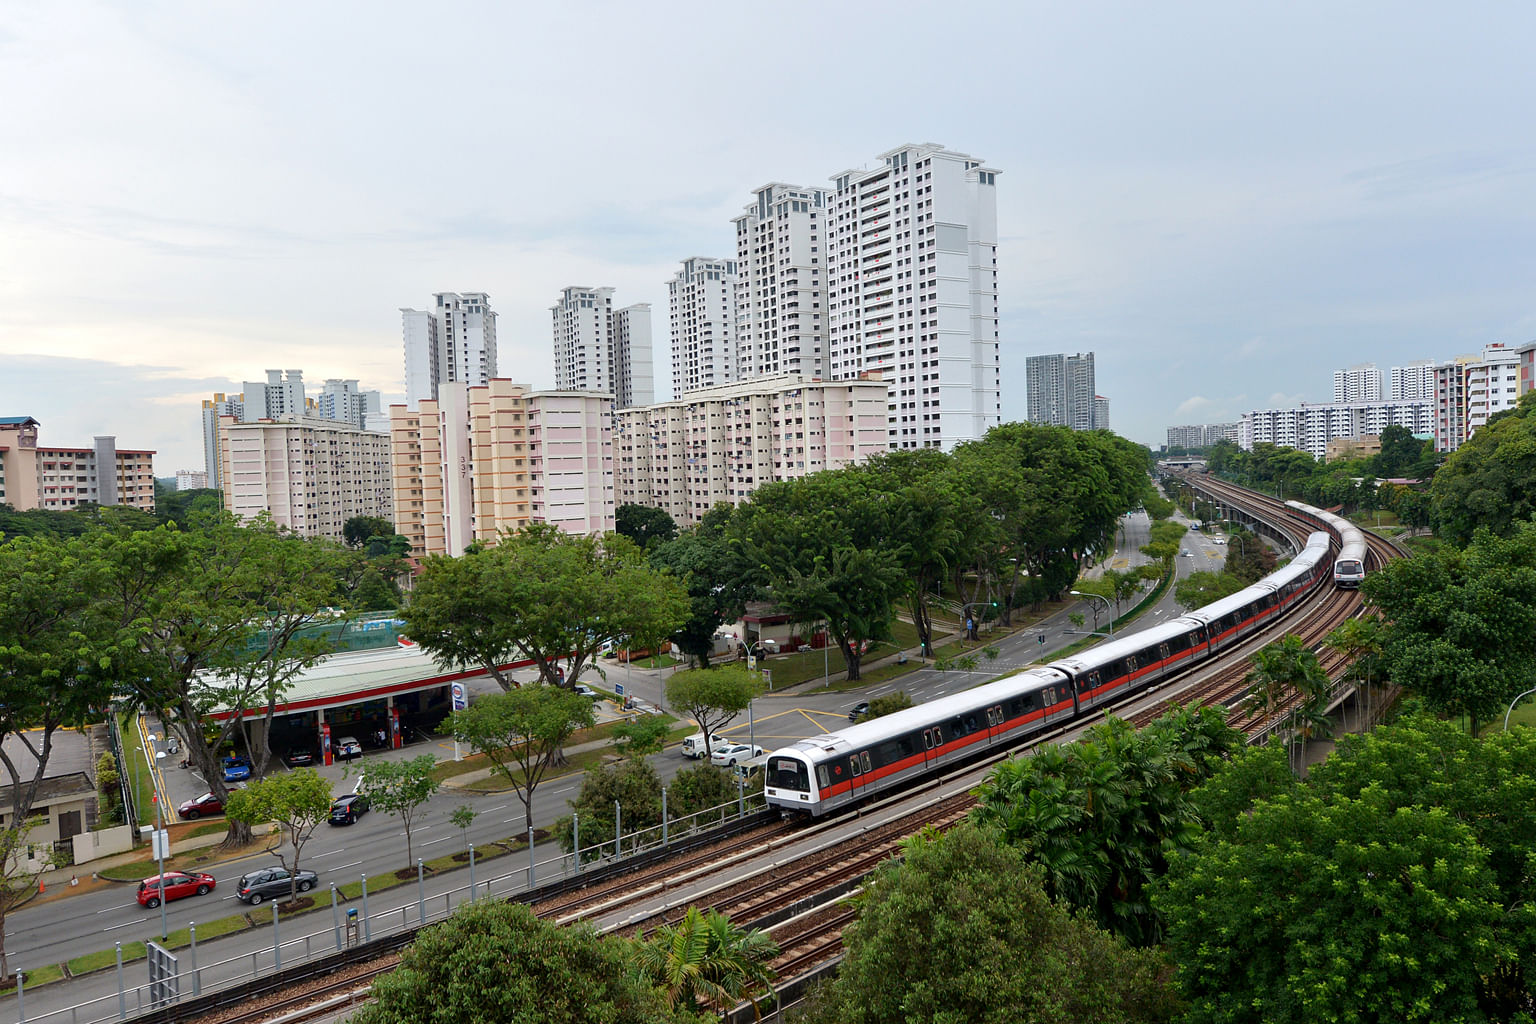 No other company's proposed privatisation has generated as much interest as that of SMRT, as it is hard to find another publicly listed company that affects the lives of millions of Singaporeans on a daily basis.